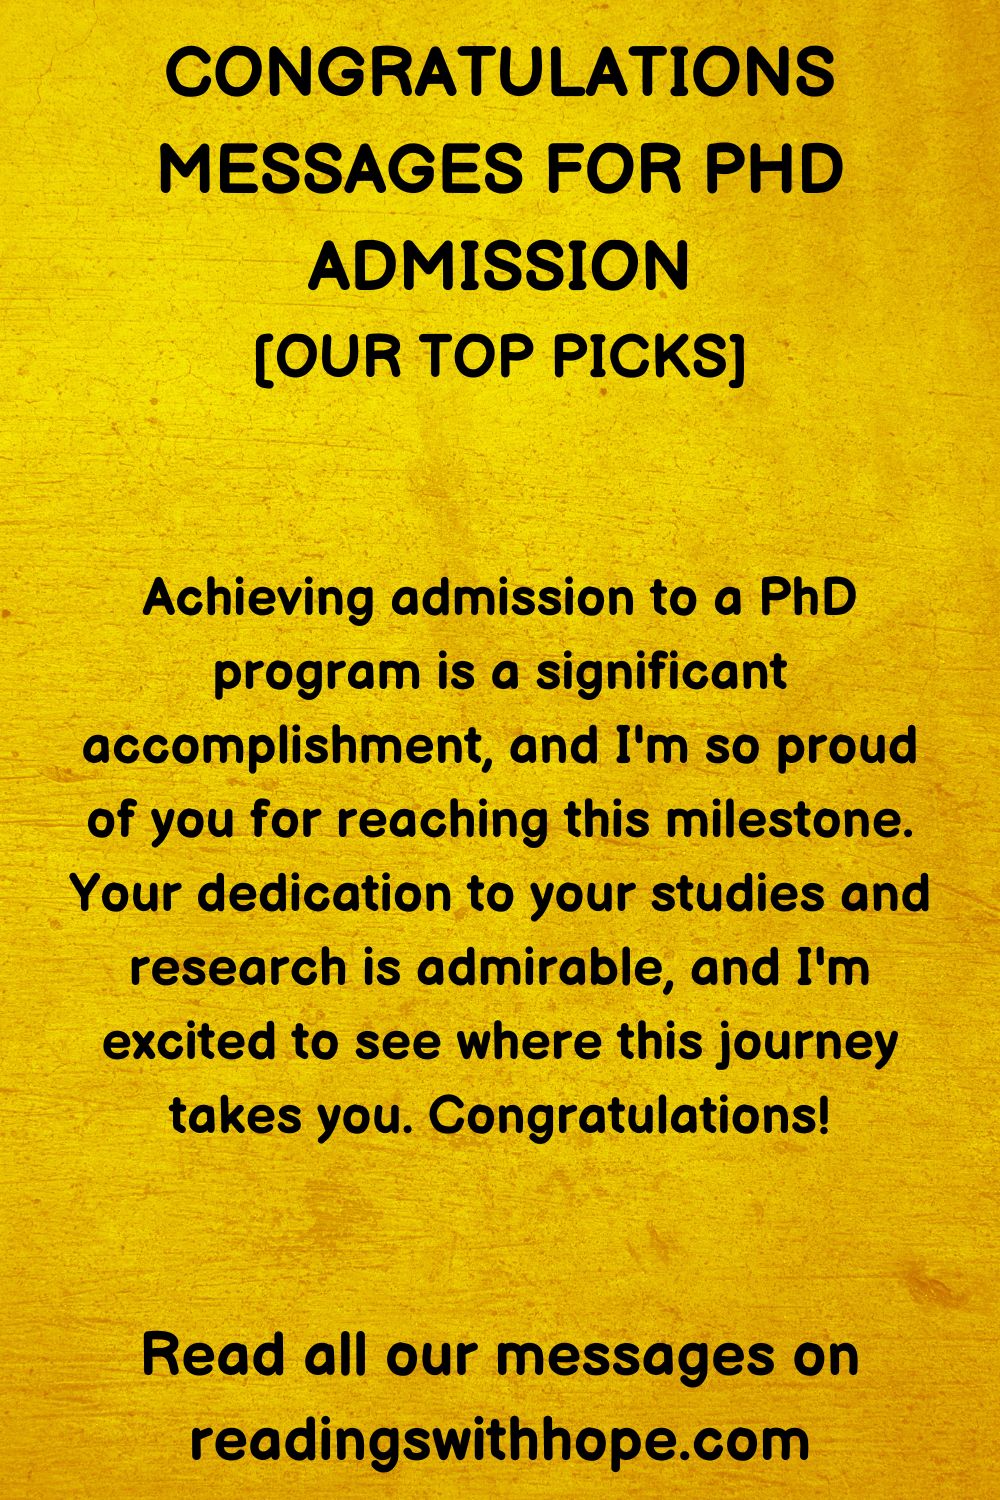 Congratulations Message for Phd Admission
